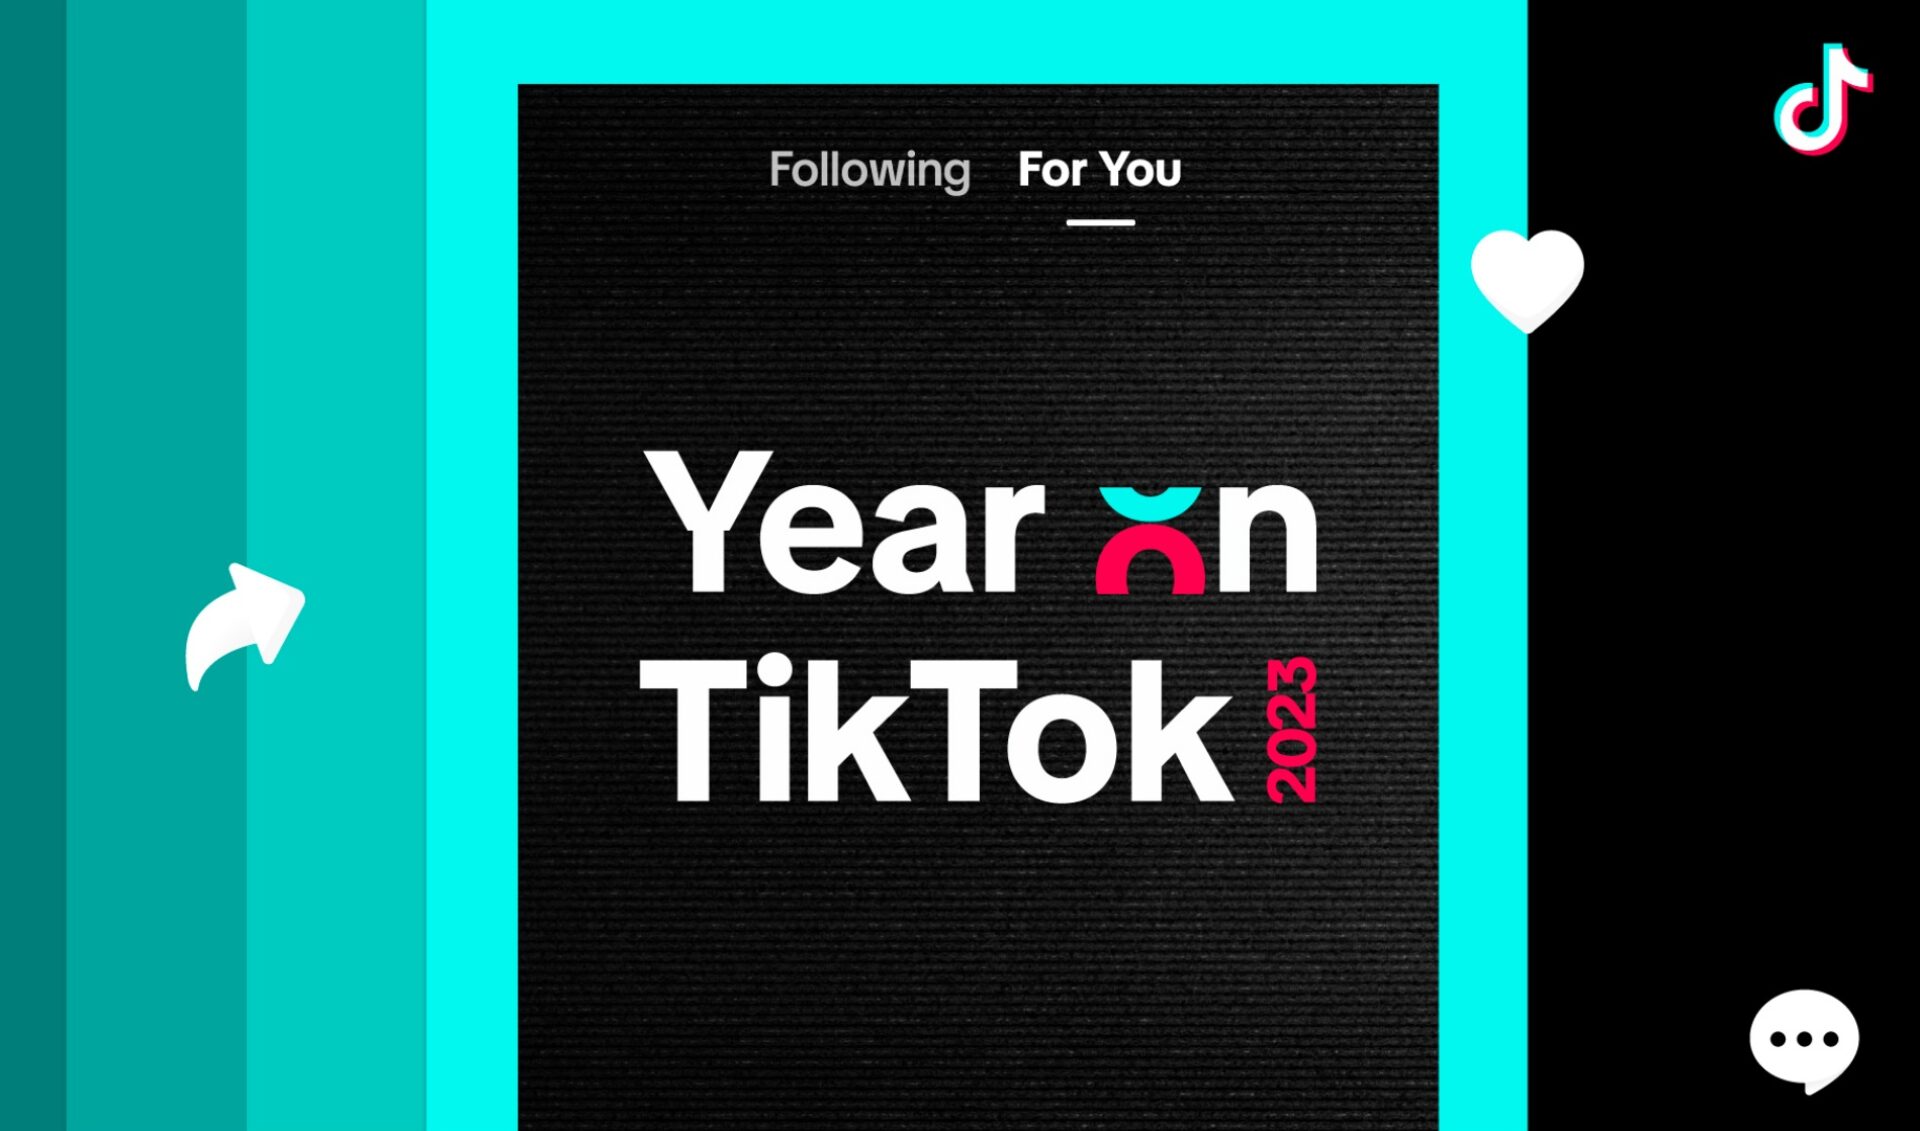 The “Year On TikTok” included pop music tours, girl dinners, and restaurant reviews. What’s next?